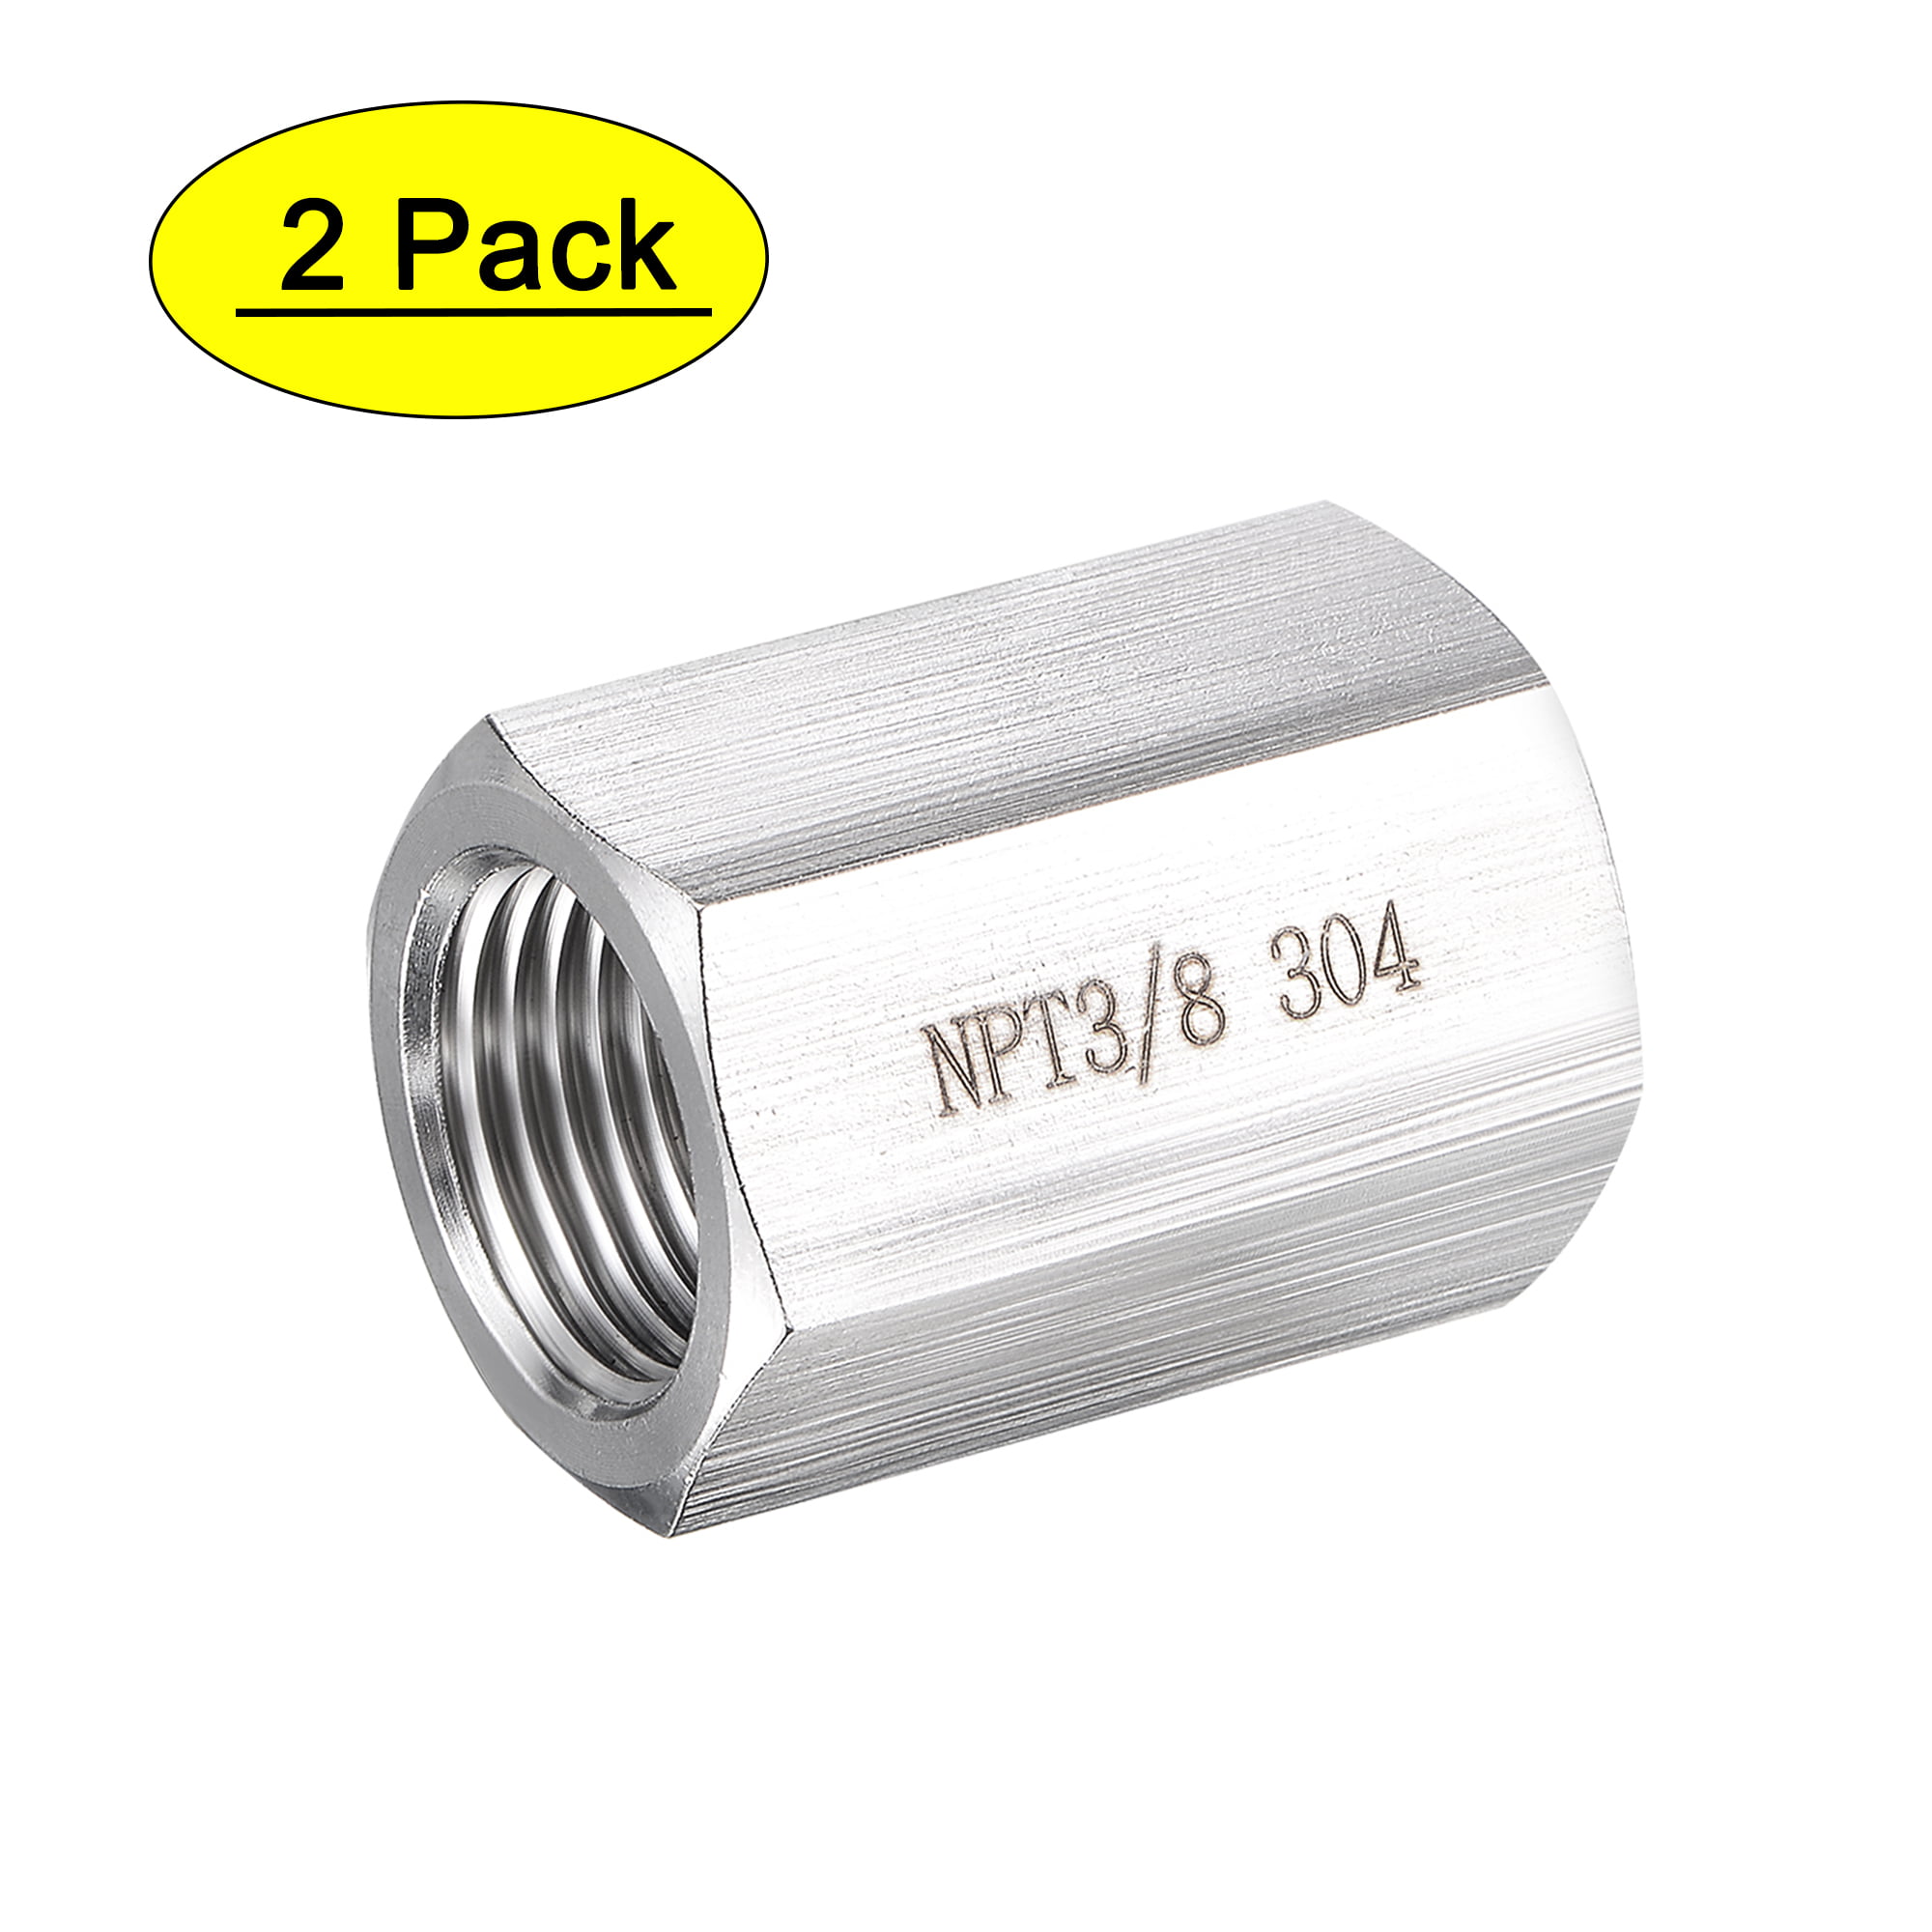 1/4" NPT Female One Way Check Valve 304 Stainless Rust Water Gas Oil Non-return 